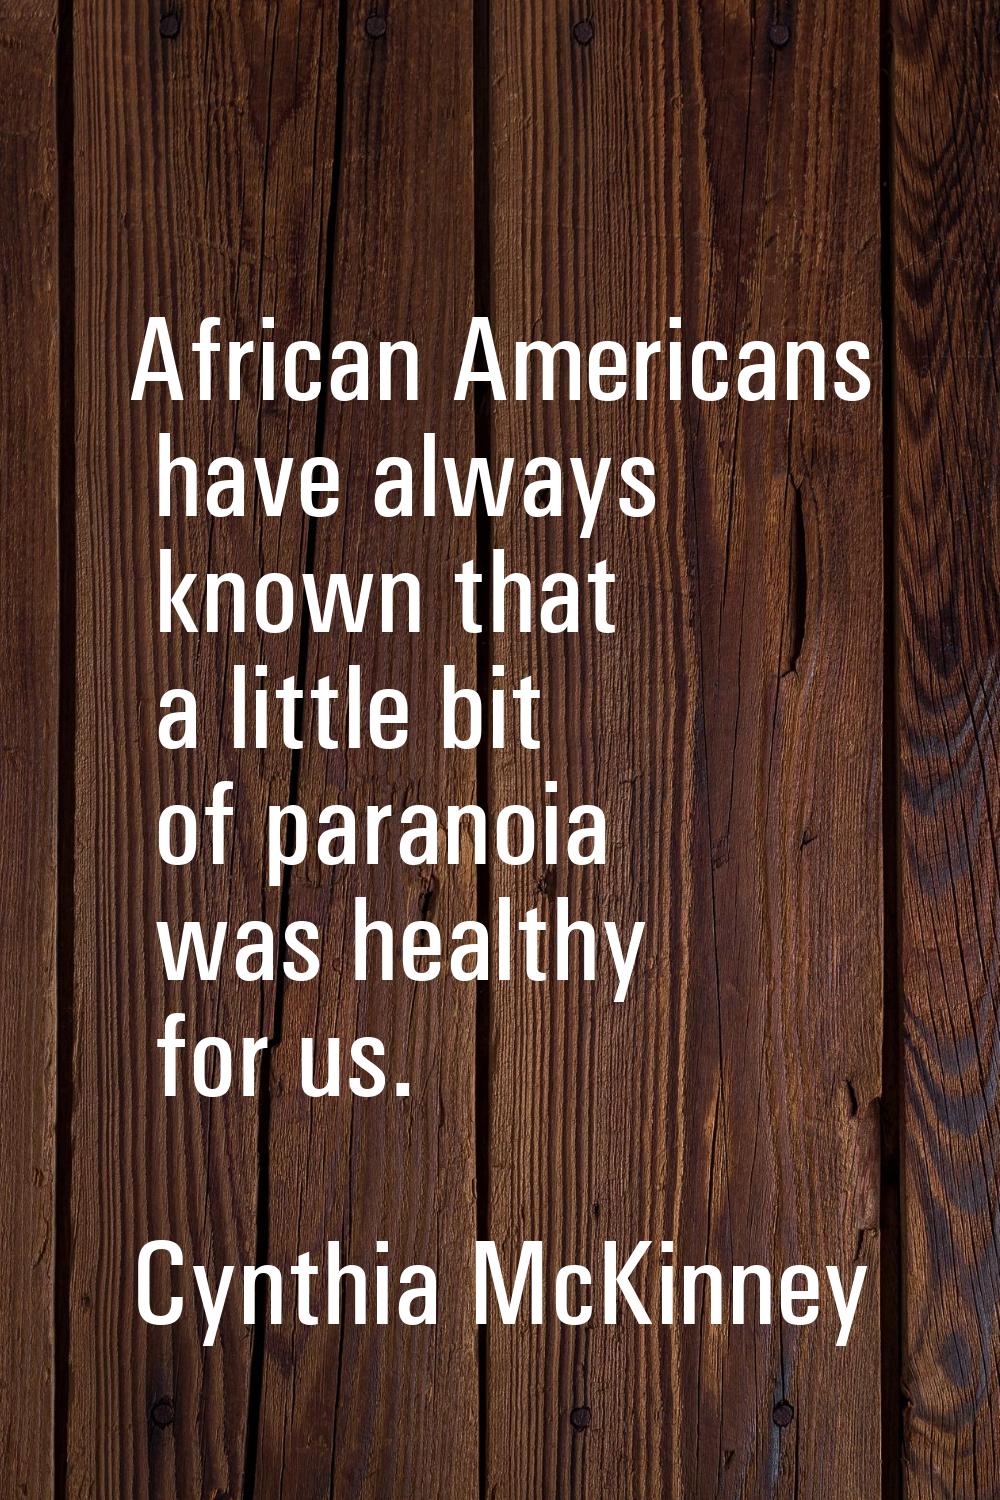 African Americans have always known that a little bit of paranoia was healthy for us.